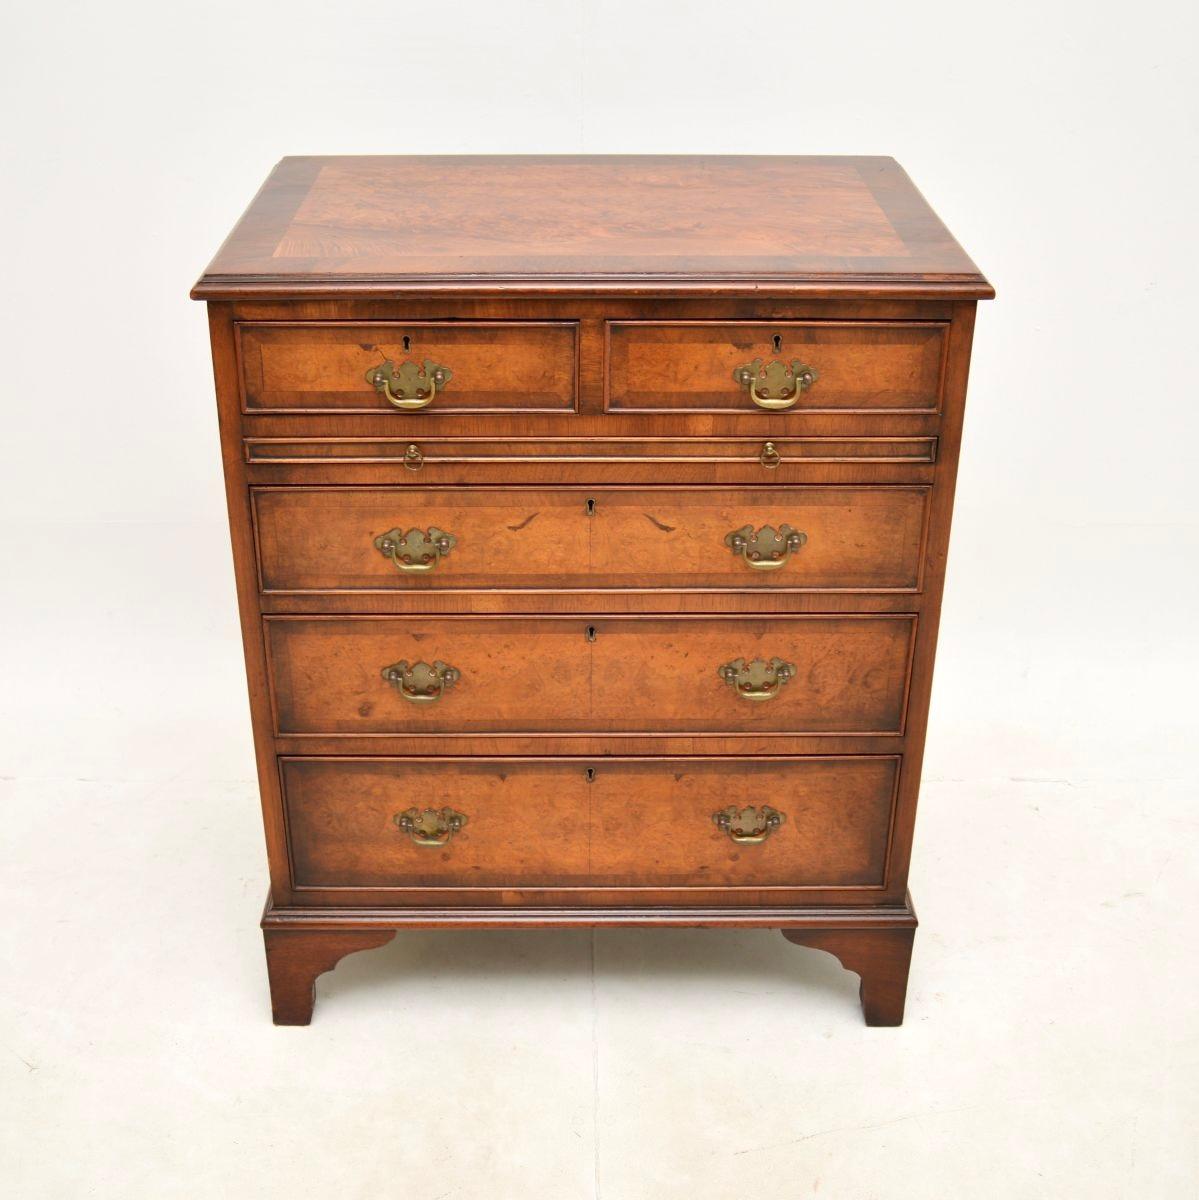 A beautiful antique burr walnut bachelors chest of drawers. This was made in England, it dates from around the 1900-1910 period.

It is of superb quality and is a useful size, with lots of storage space. There are gorgeous burr walnut grain